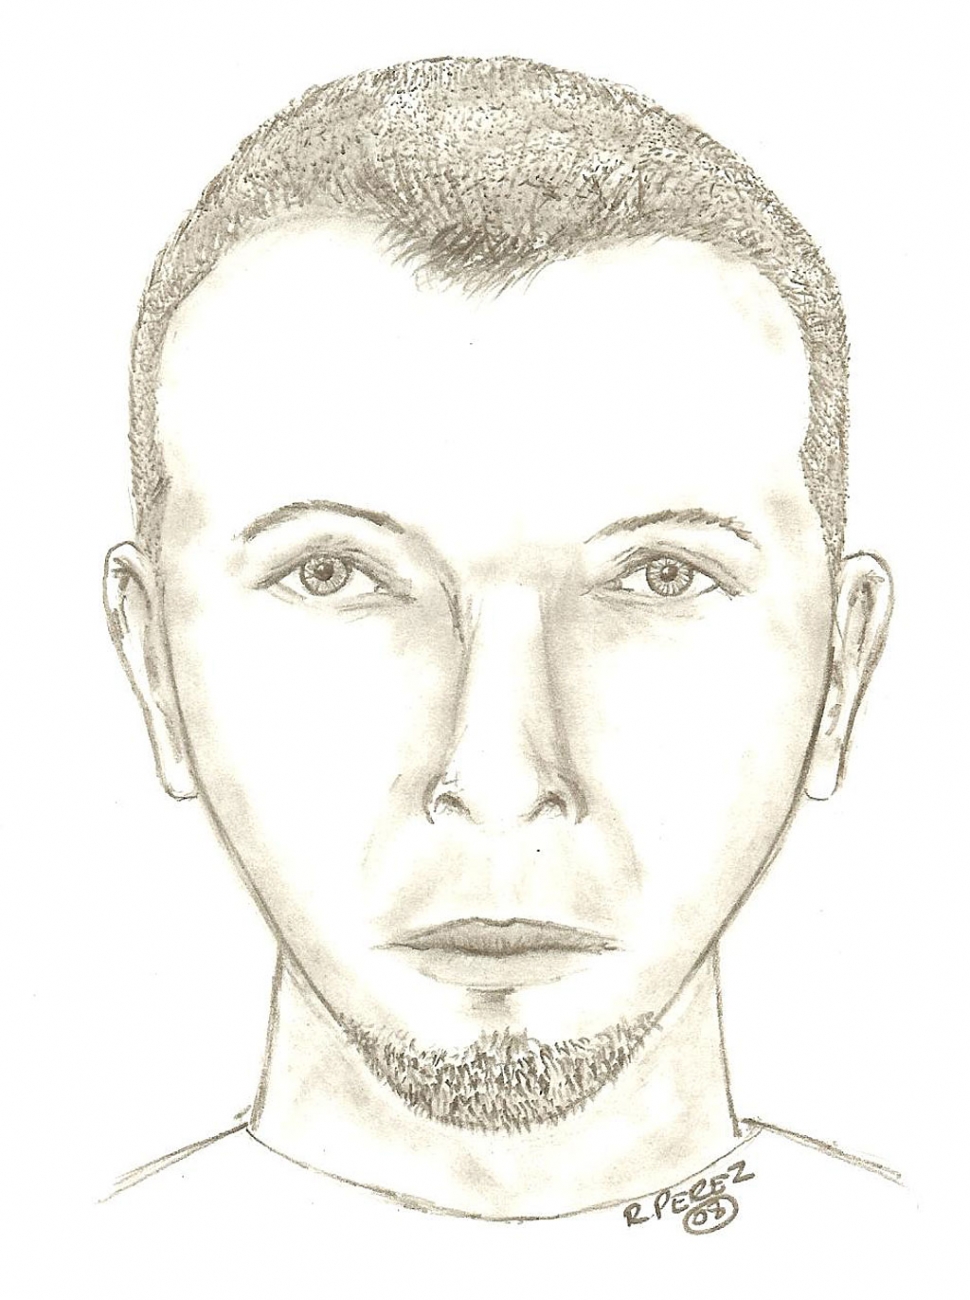 Composite Sketch of the suspect. Description: White male, late 20s early 30s, short brown hair, bluish-green eyes, 5’07” to 5’08” tall, 150 to 160 lbs, thin medium build, white T-shirt with unknown design on front, blue jean shorts, black shoes.